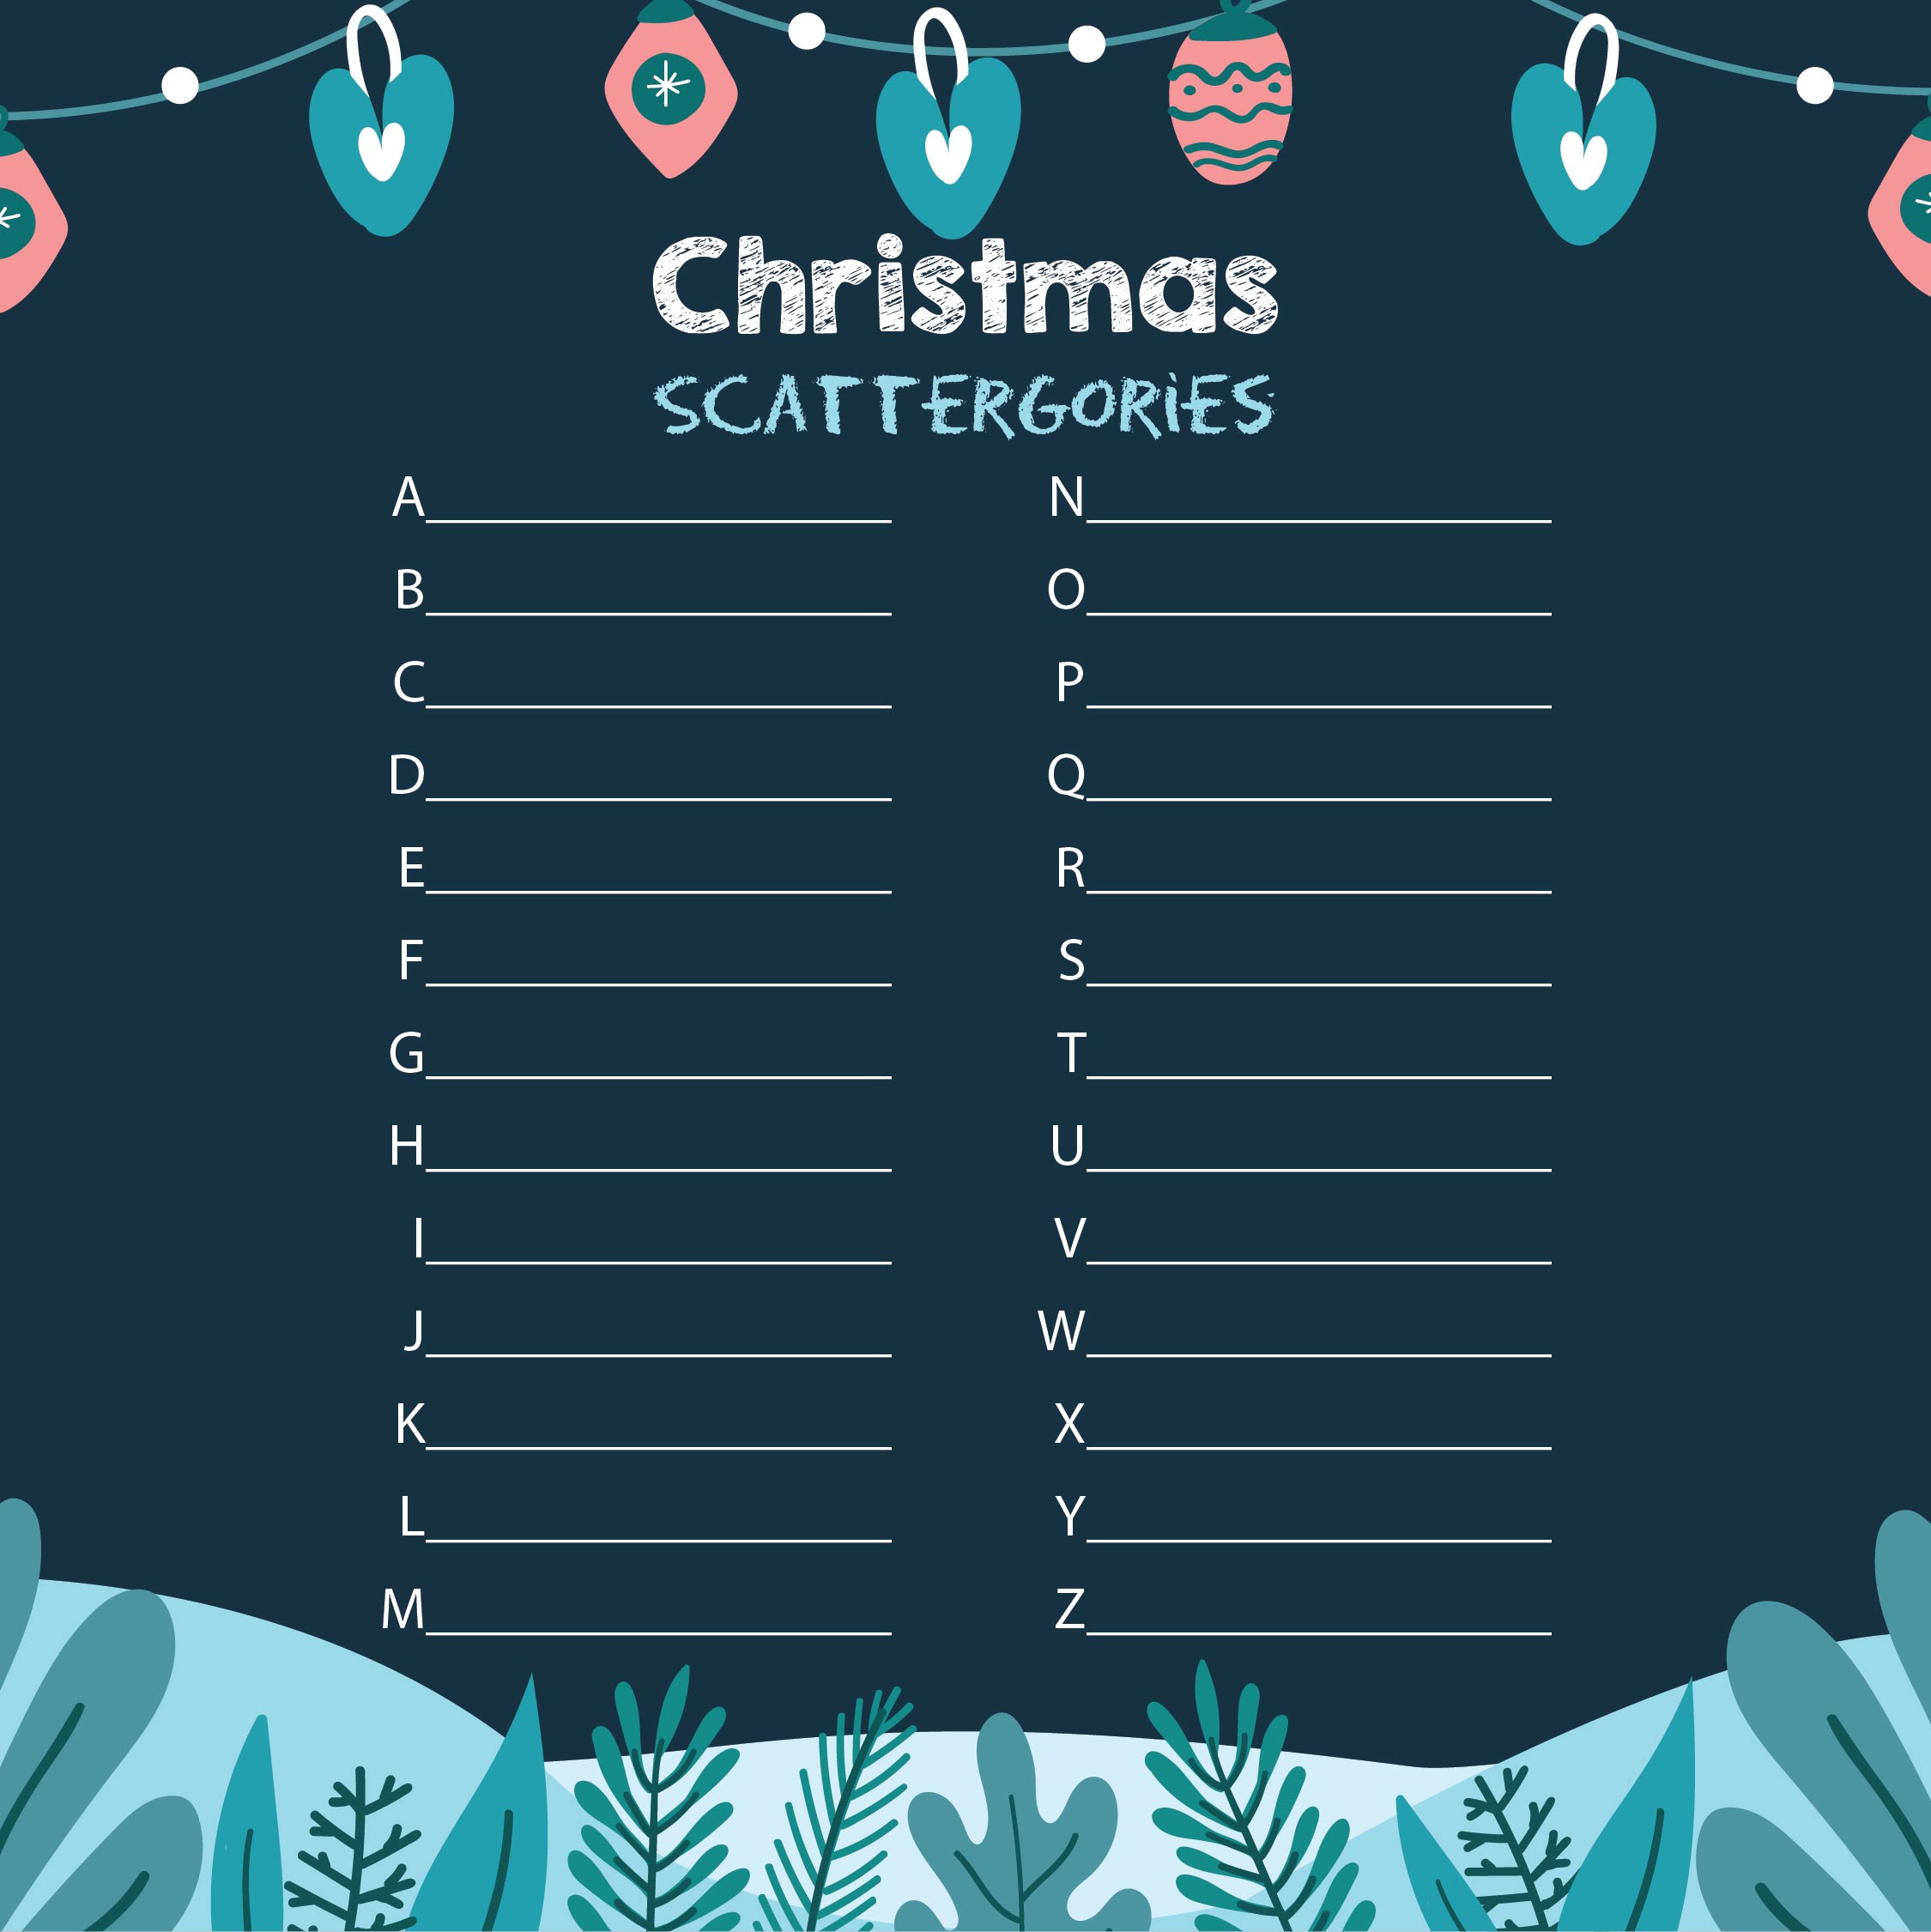 Christmas Scattergories Lists Printable